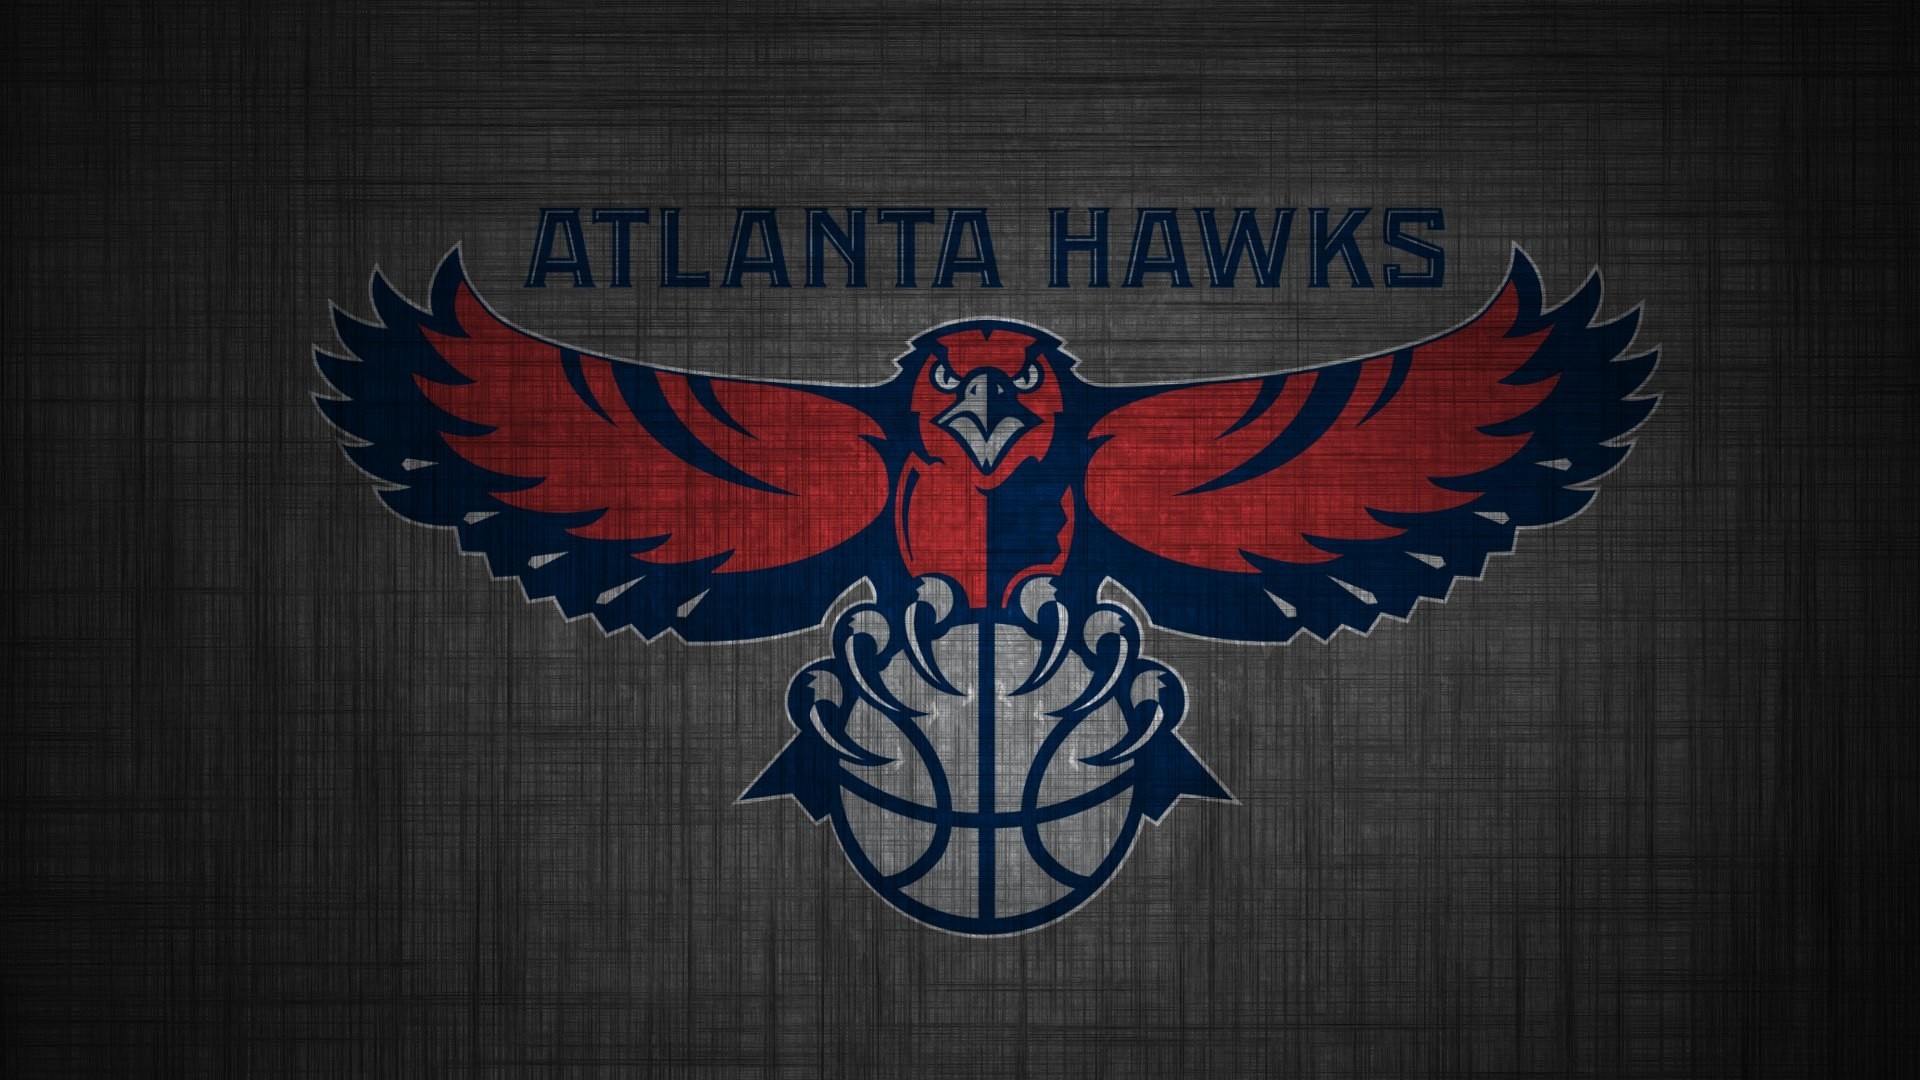 Atlanta Hawks Mac Backgrounds with image dimensions 1920x1080 pixel. You can make this wallpaper for your Desktop Computer Backgrounds, Windows or Mac Screensavers, iPhone Lock screen, Tablet or Android and another Mobile Phone device